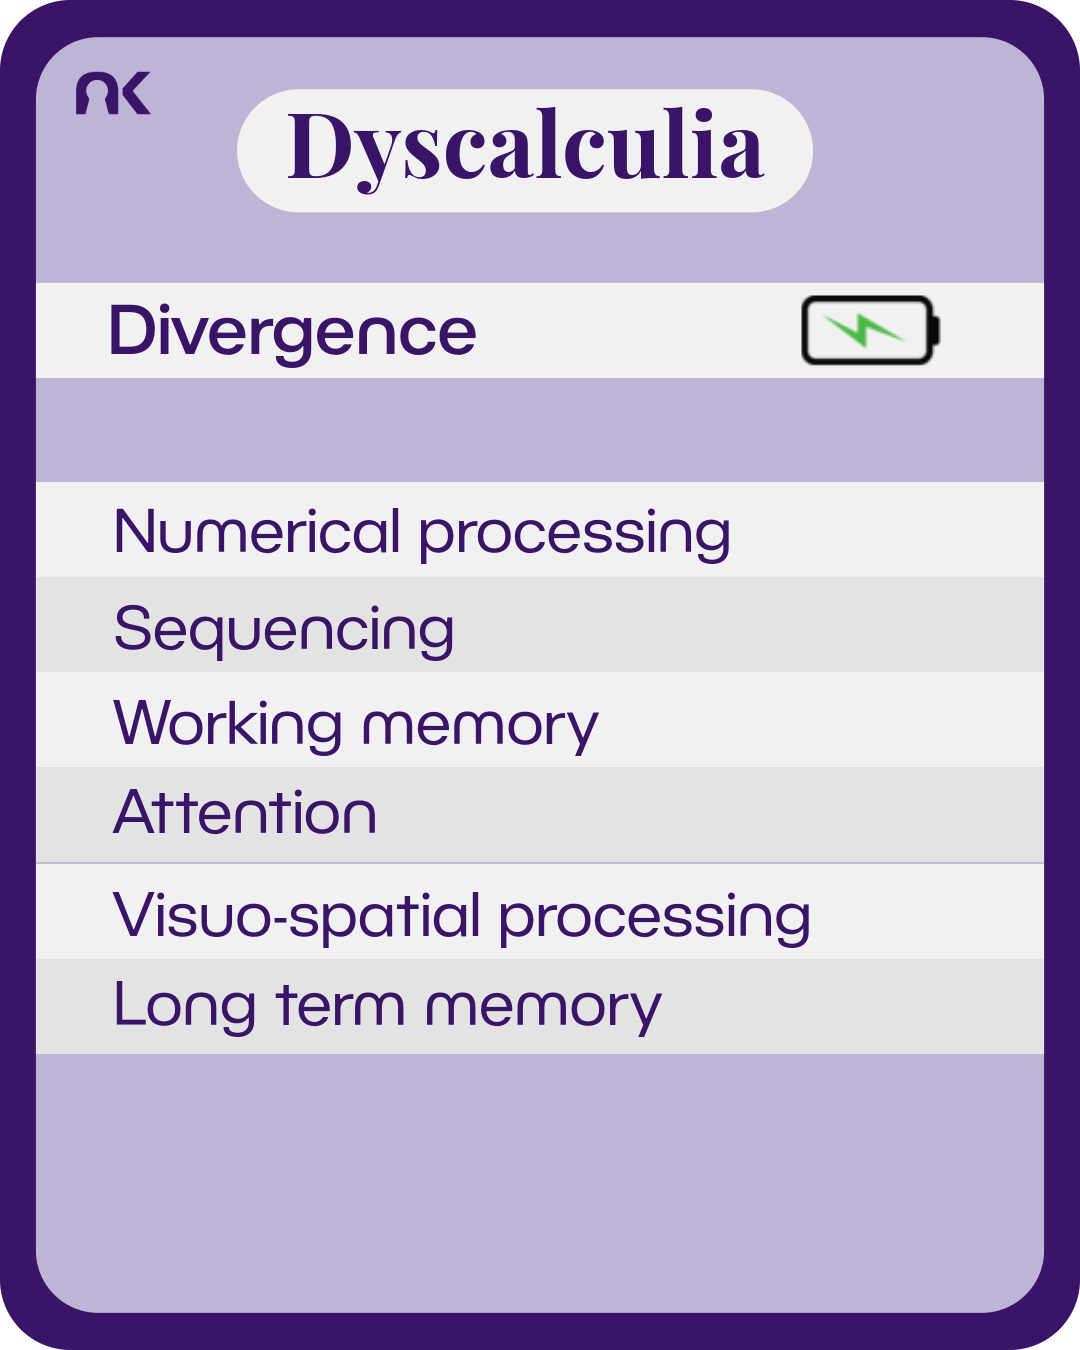 An information card made to look like it is from a card game. Next to the subtitle "divergence" is a battery with an electric bolt inside it. Text says: "Dyscalculia. Divergence. Numerical processing; Sequencing; Working memory; Attention; Visuo-spatial processing; Long term memory."